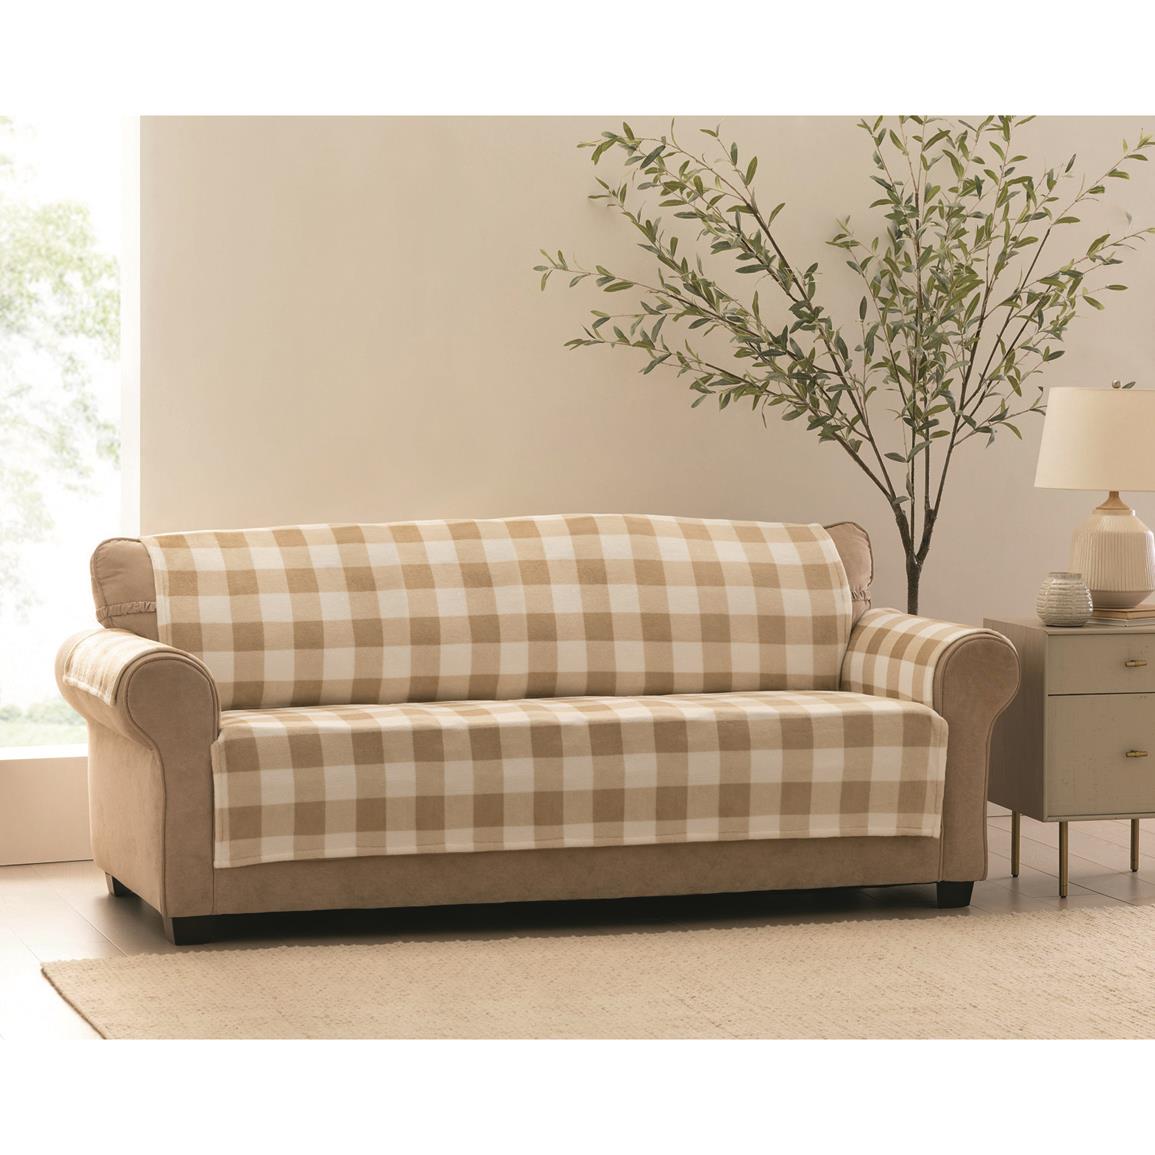 Innovative Textile Solutions Franklin Furniture Cover, Linen